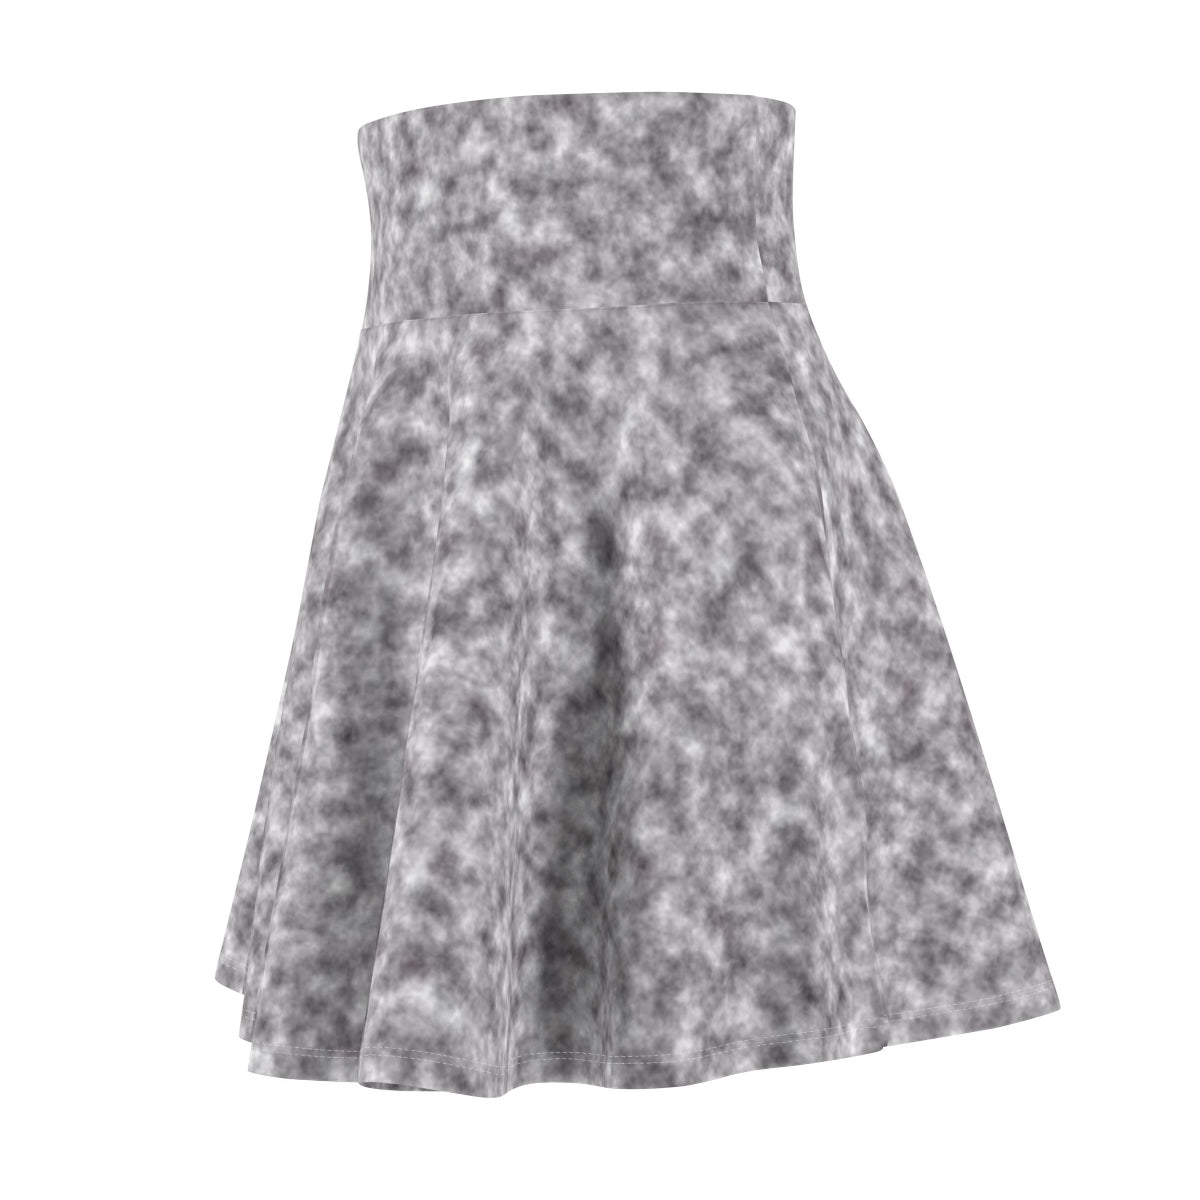 Gray and White Clouds Skater Skirt